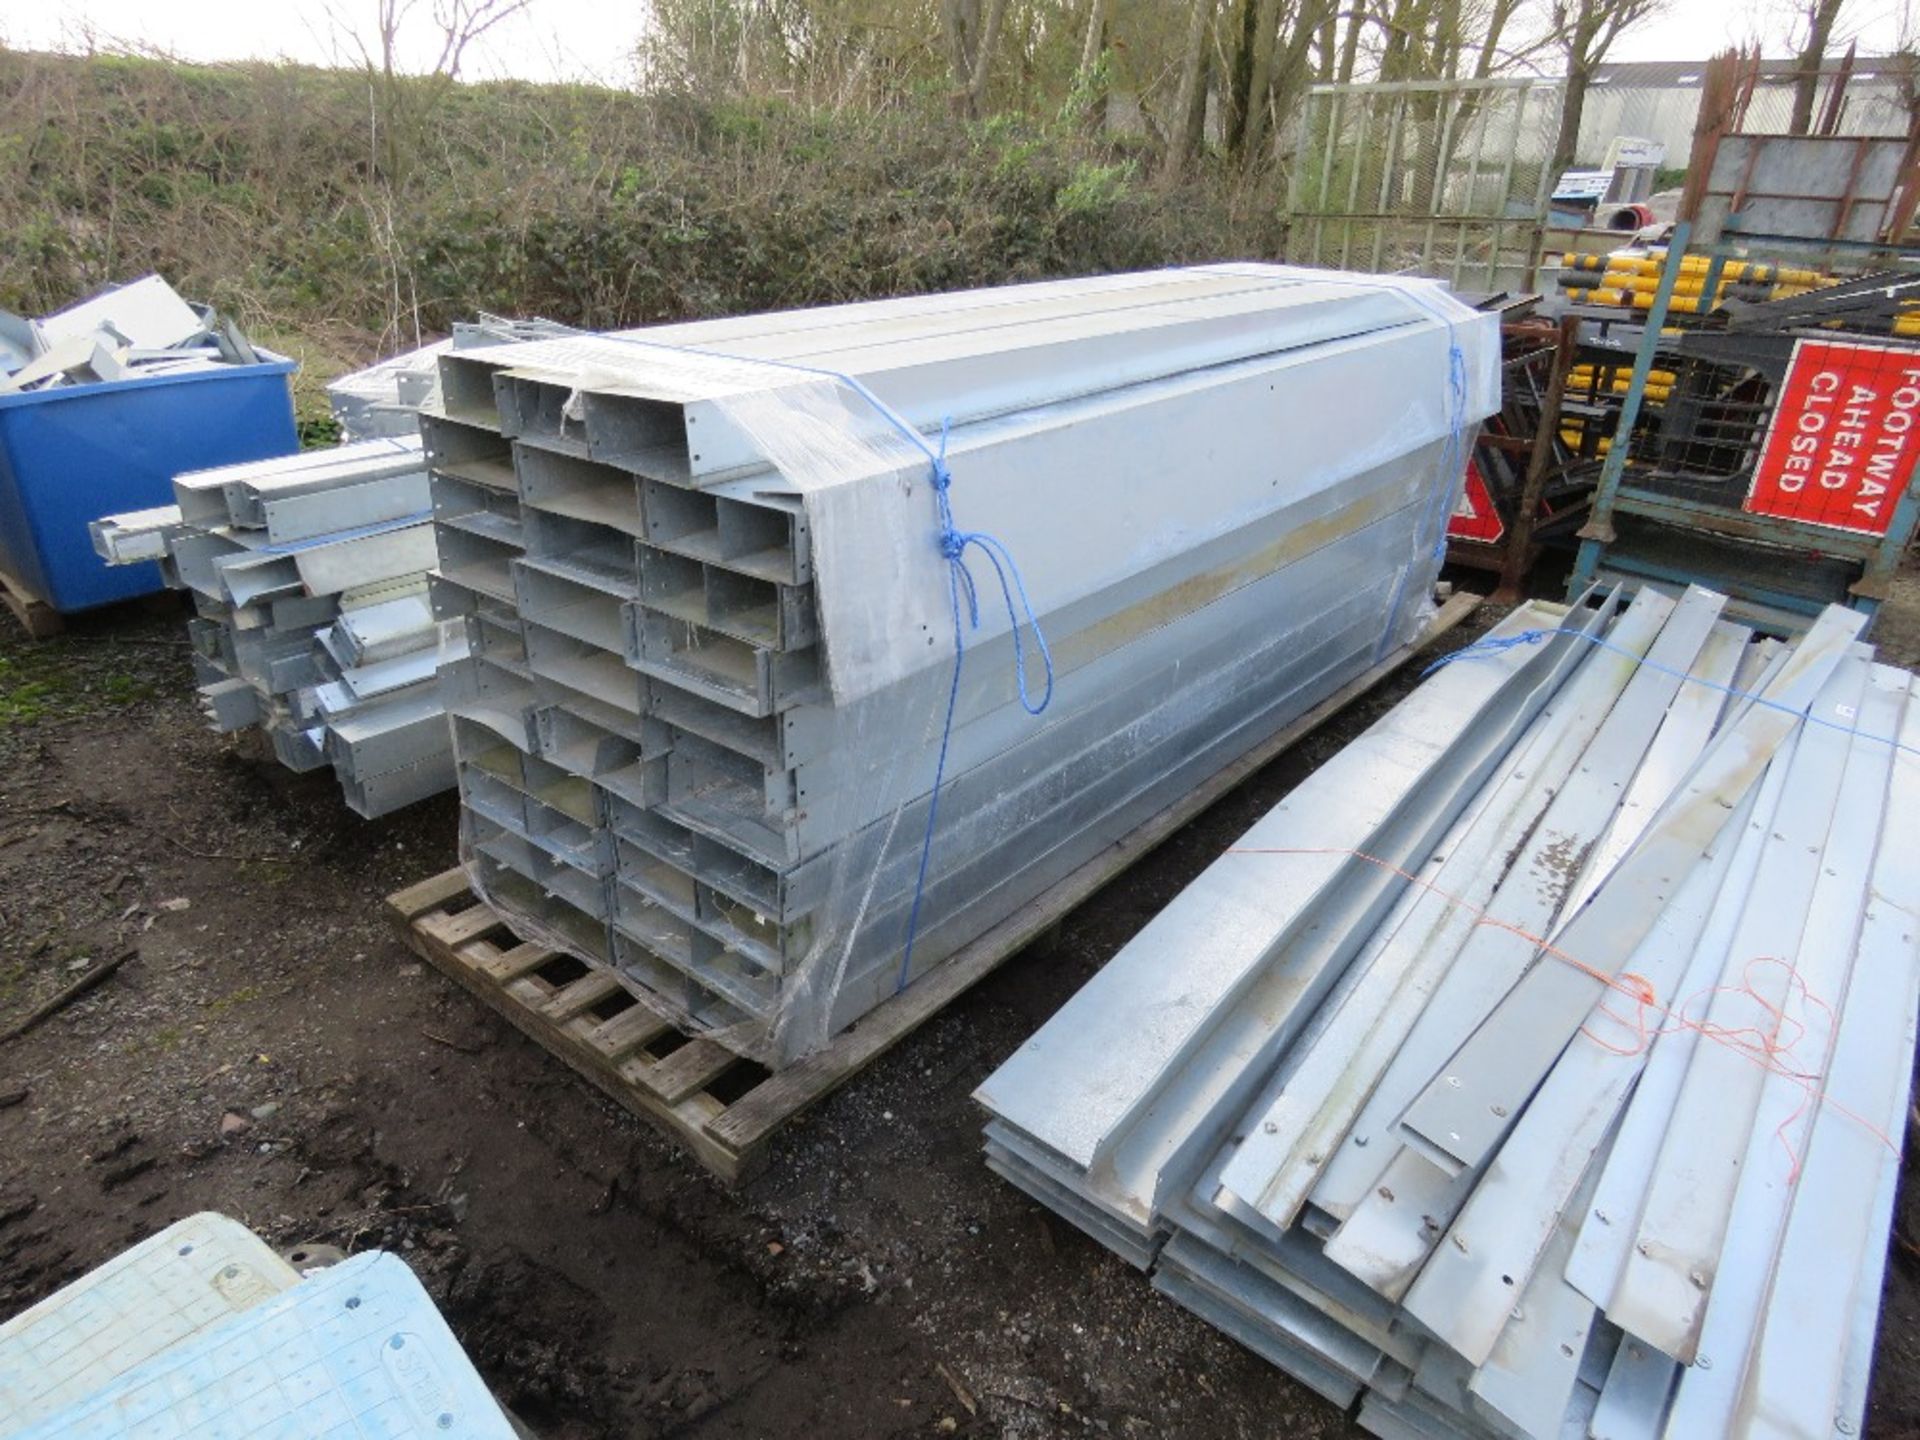 LARGE QUANTITY OF METAL DUCTING PARTS INCLUDING DUCTS AT 9FT LENGTH APPROX. SOURCED FROM COMPANY LIQ - Image 9 of 9